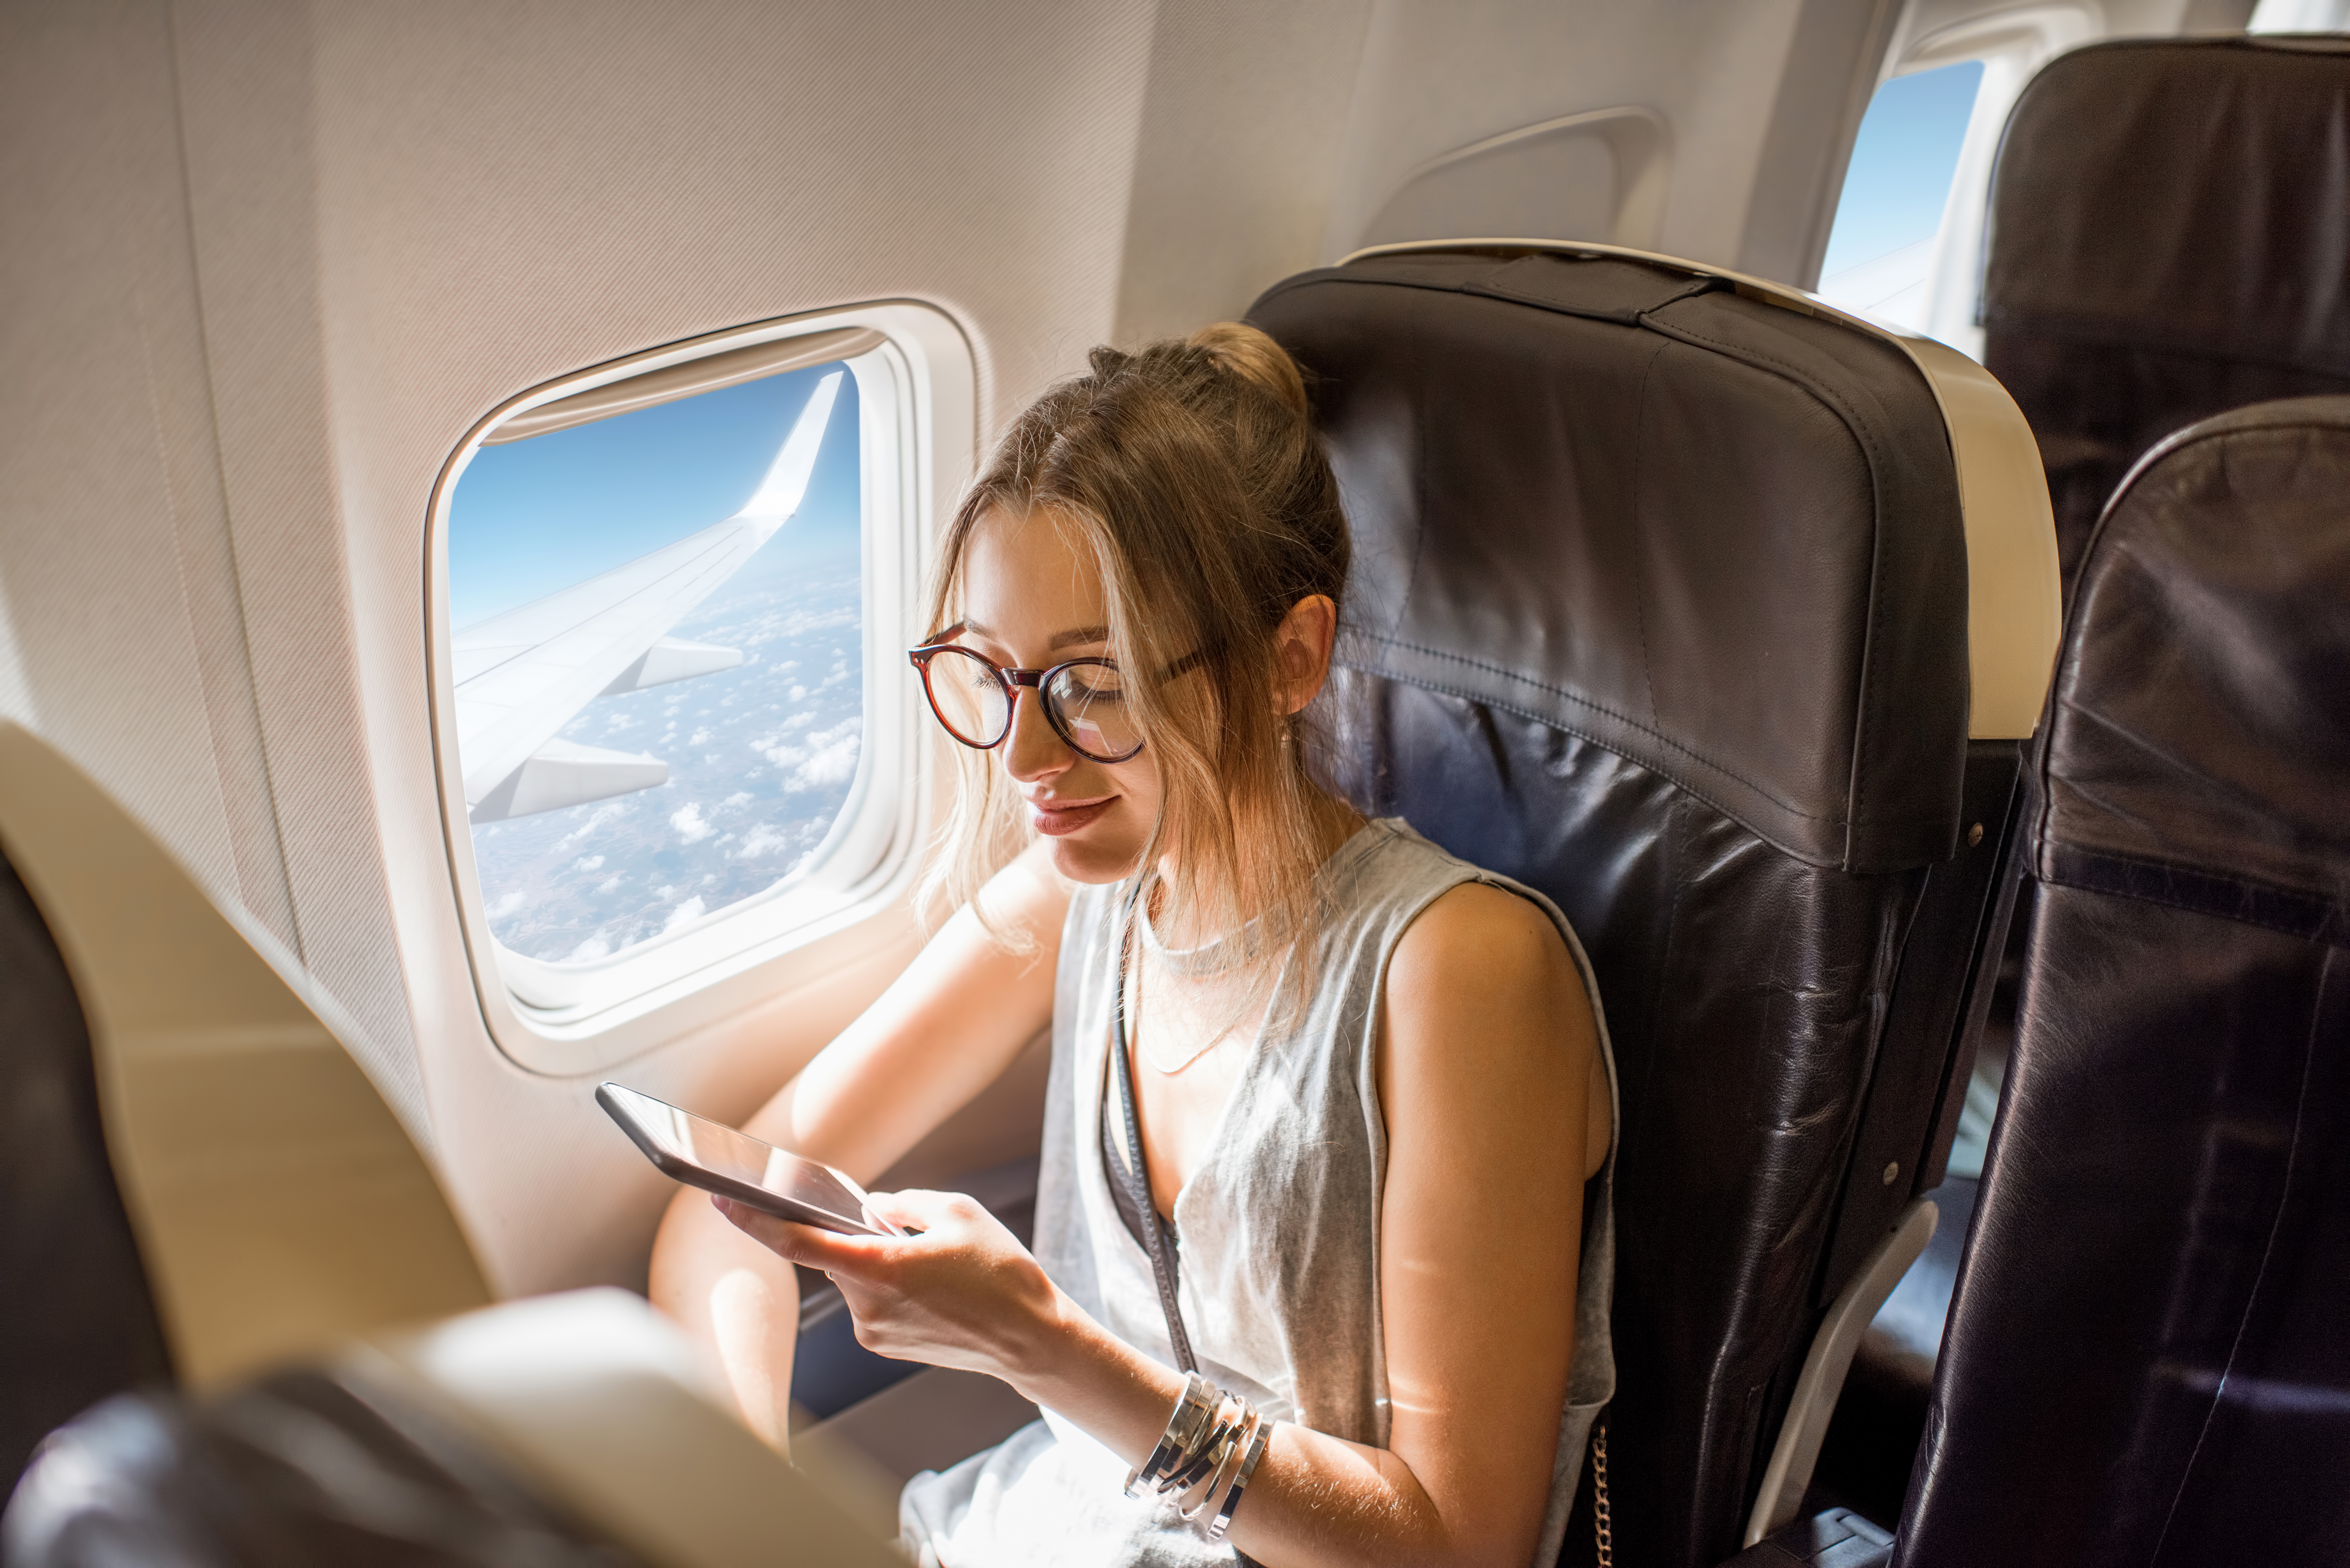 A young woman holding her phone mid-flight | Source: Shutterstock